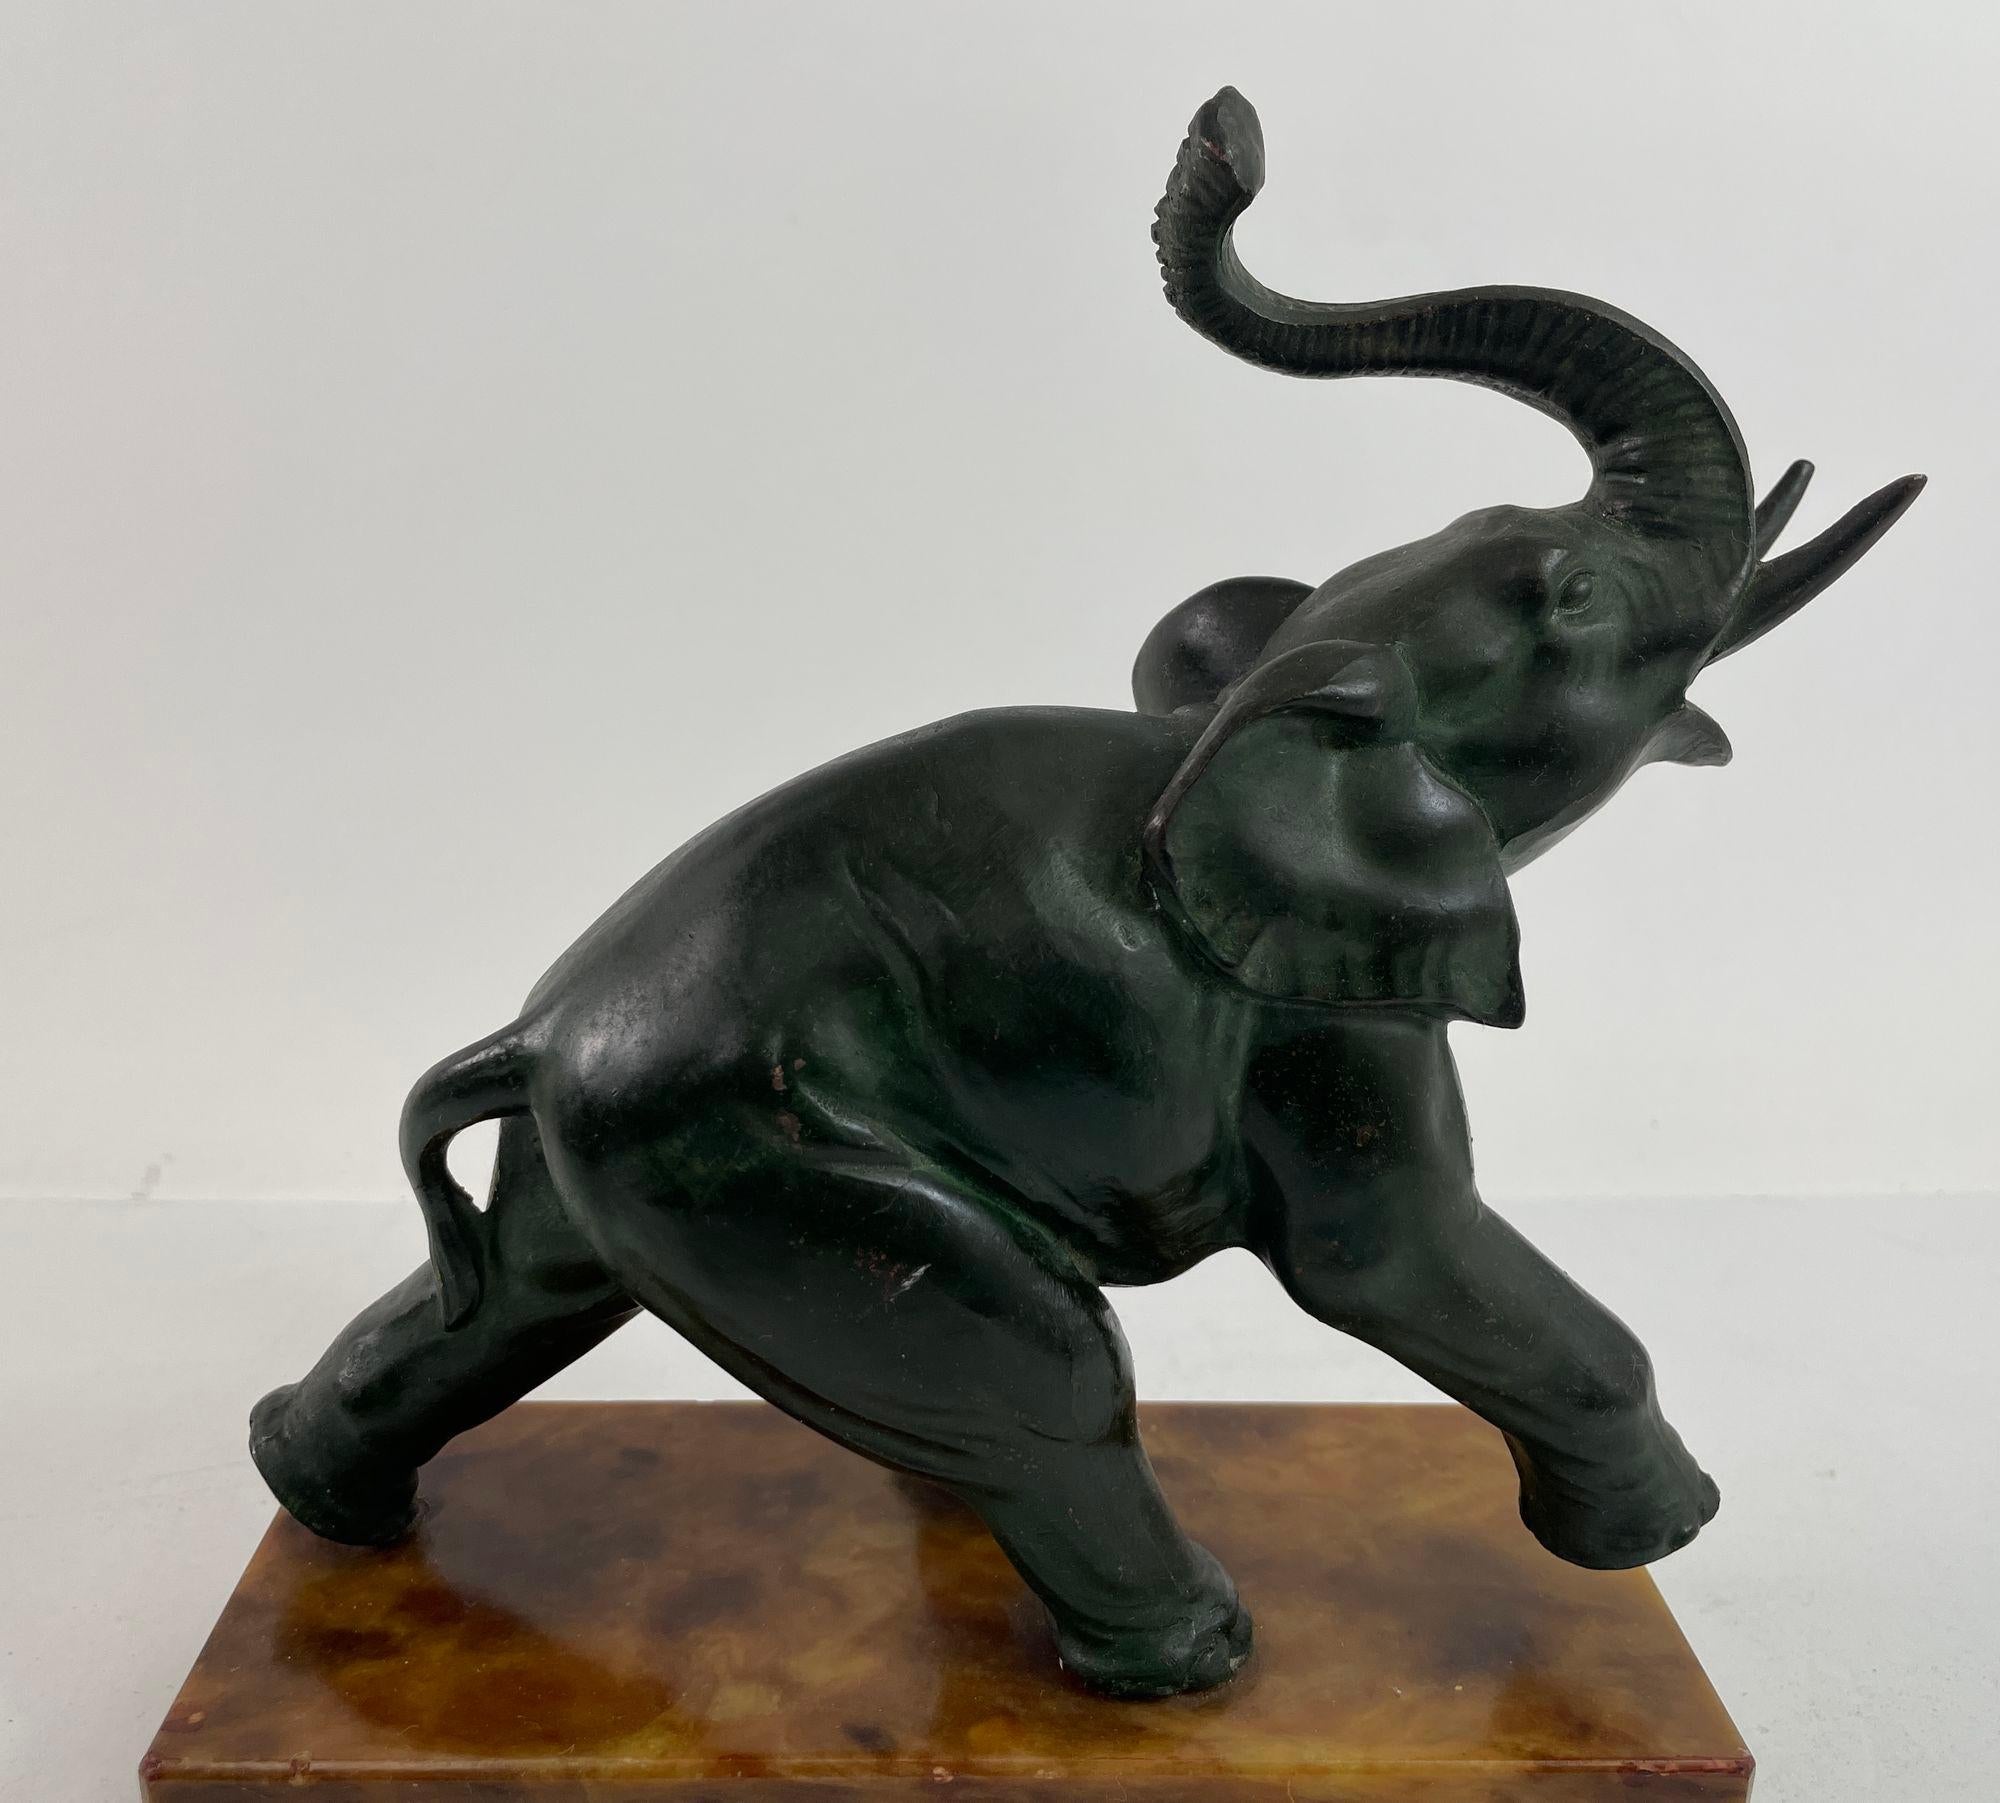 Art Deco Bronze Elephant Sculpture Italy.
Impressive bronze Art Deco sculpture of an elephant in dark green cast bronze on brown marble base.
Elephant with raised trunk on marble base.
Green felt on bottom with paper tag 